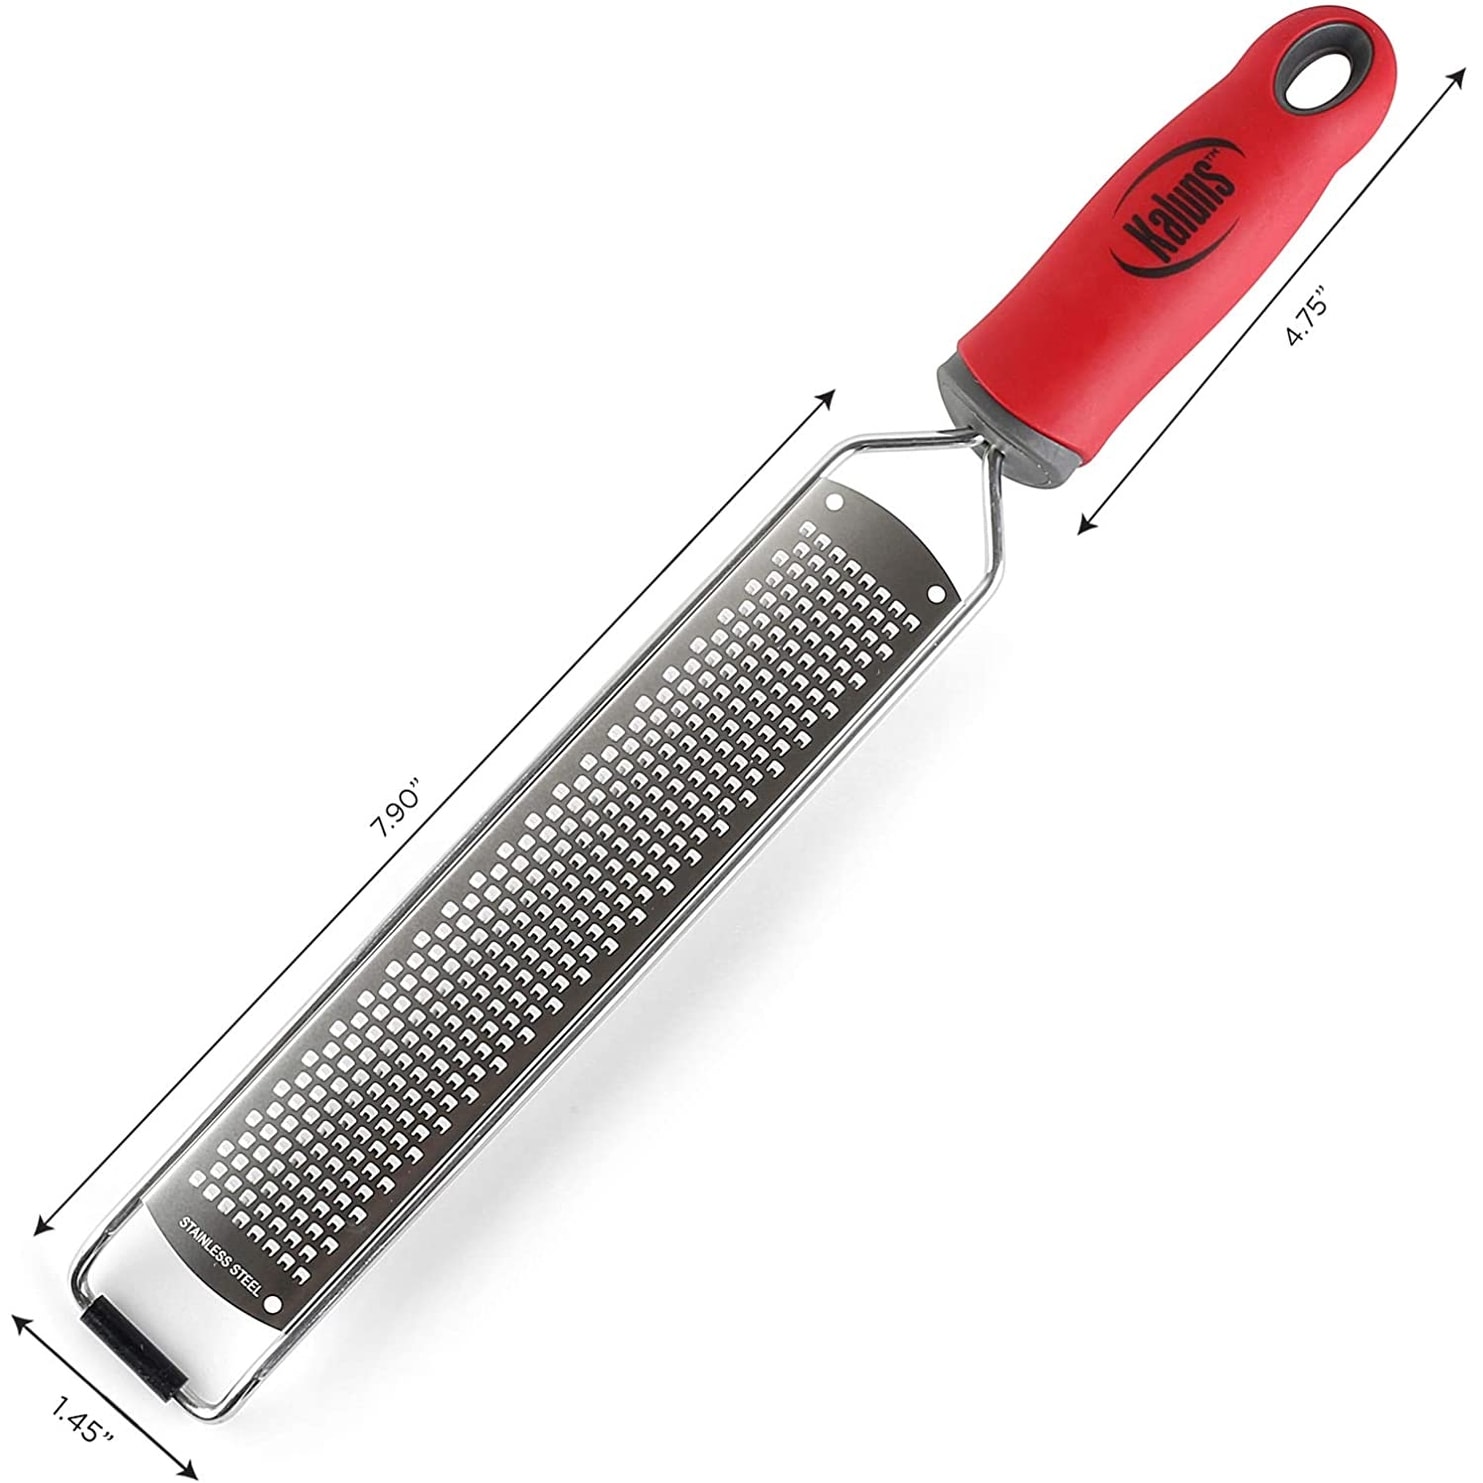 Lemon Zester and Cheese Grater - Bed Bath & Beyond - 32064888